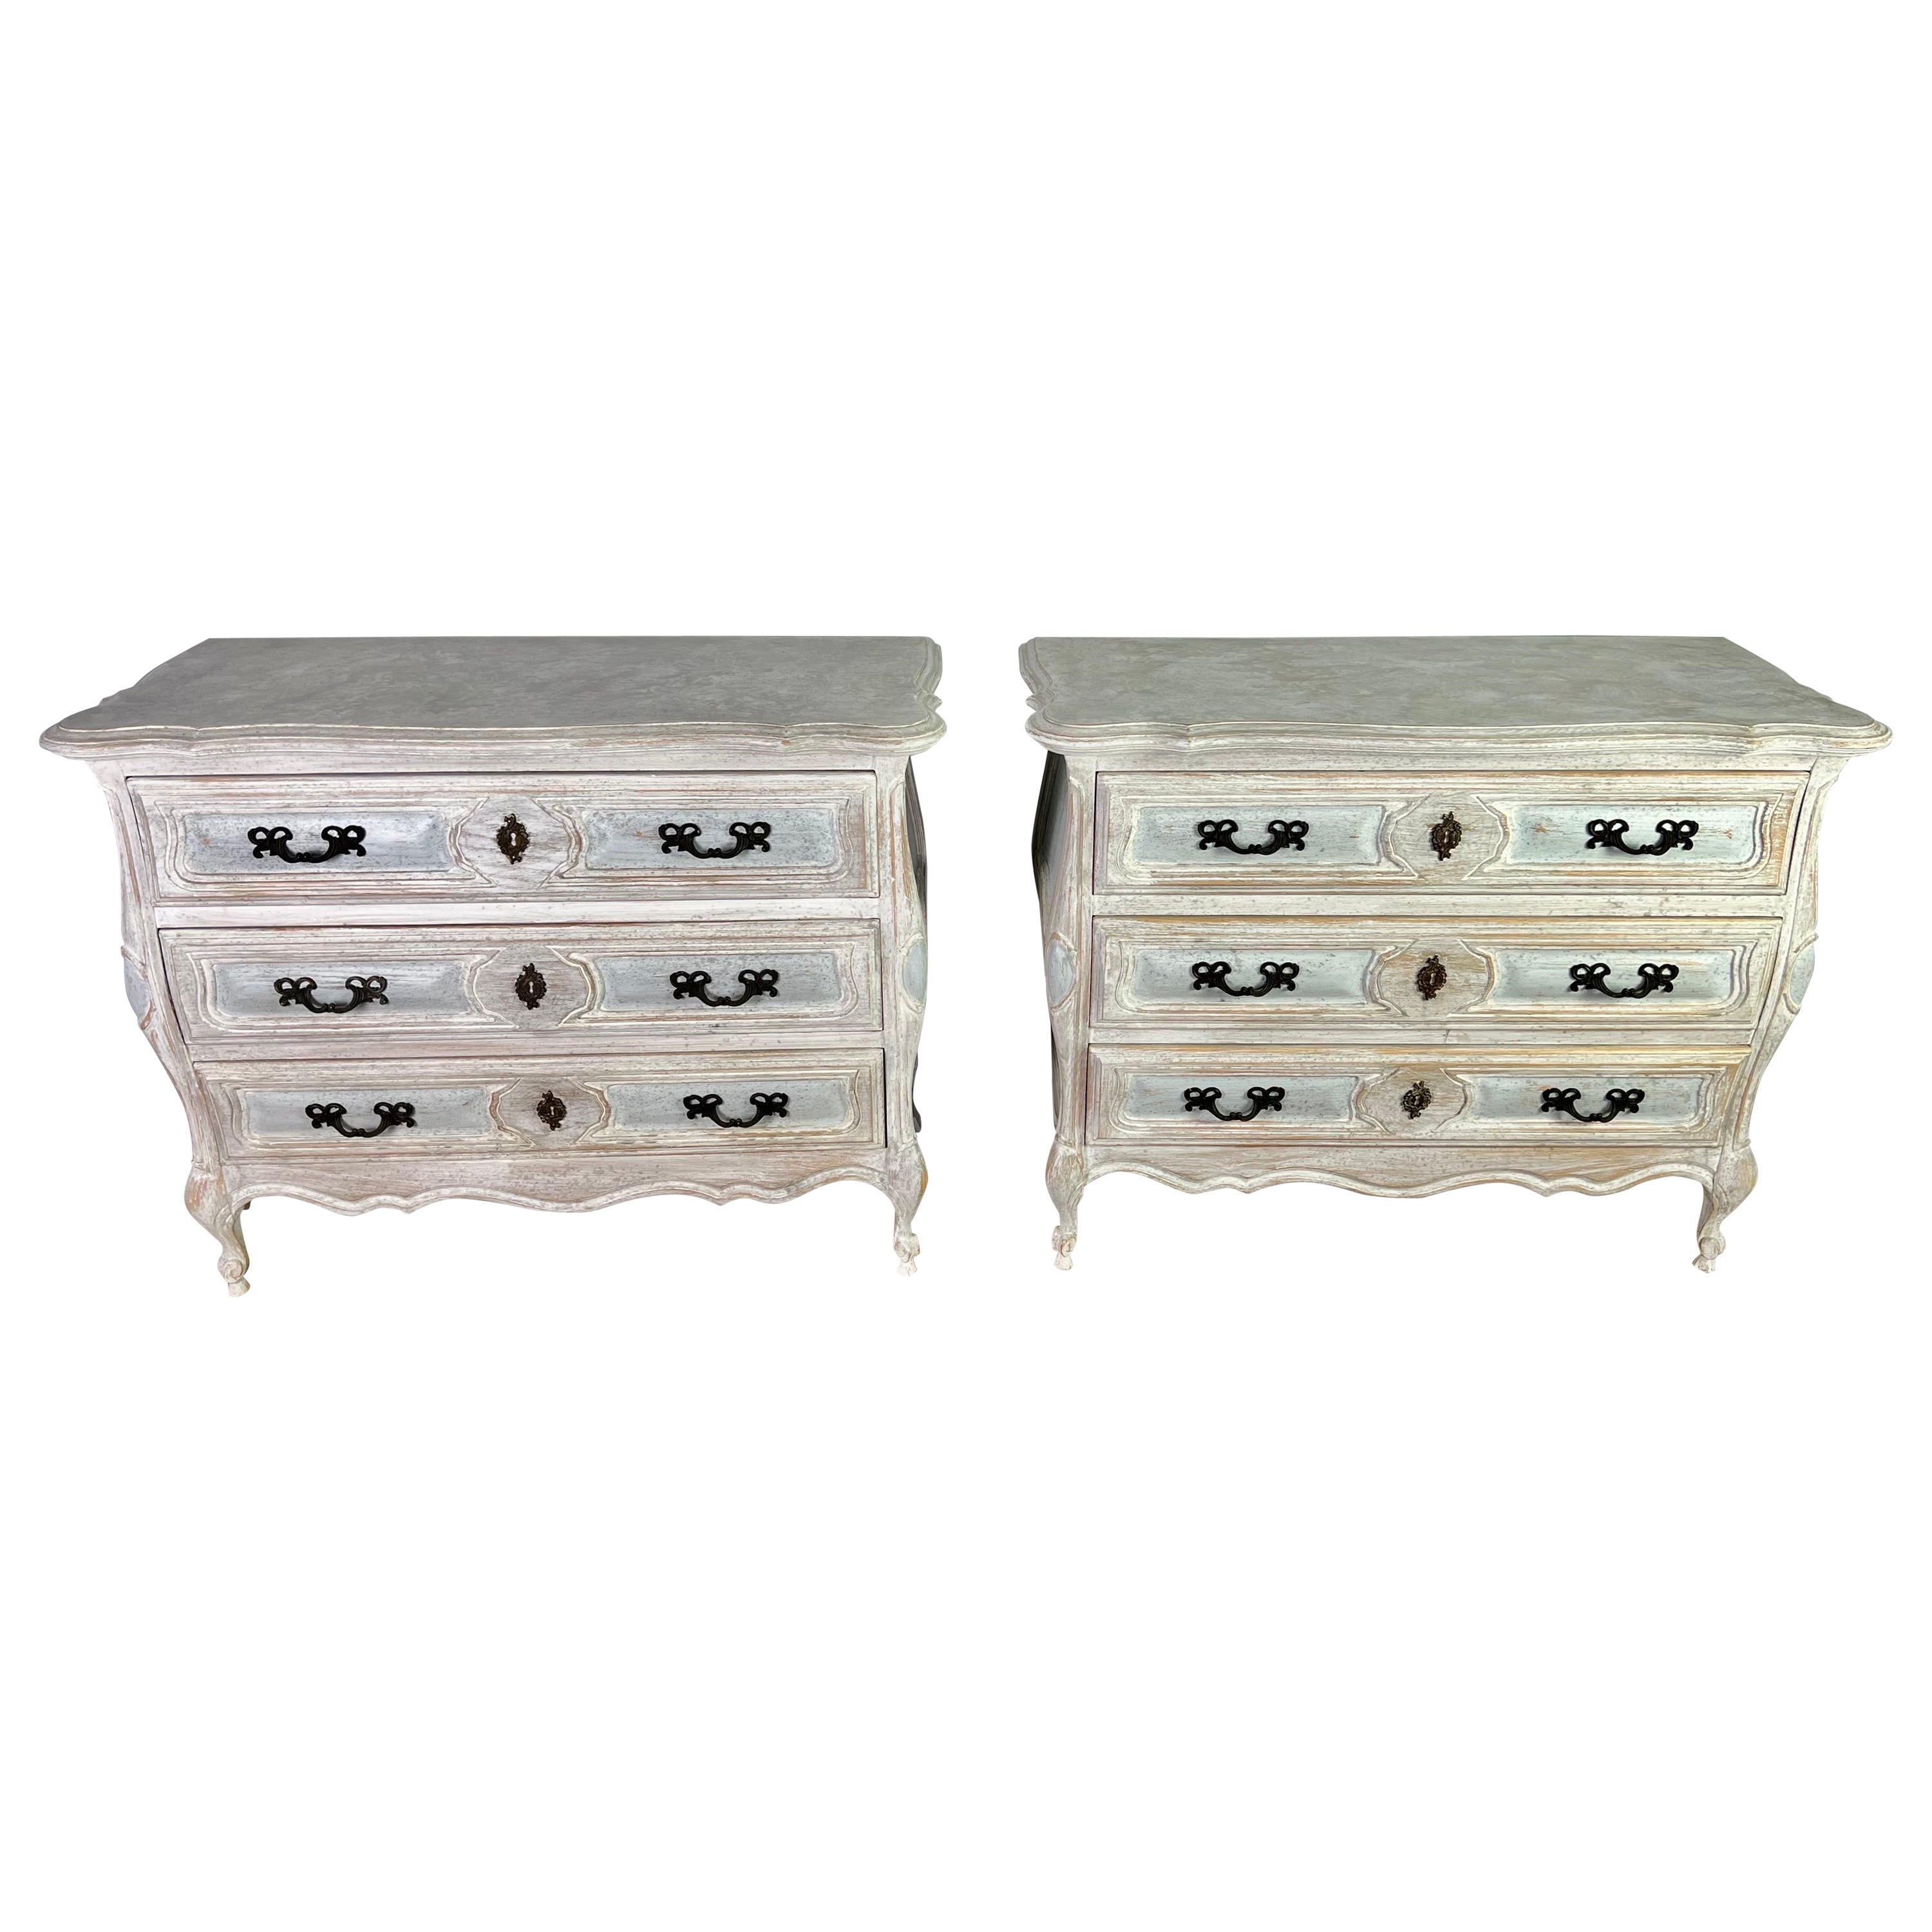 Pair of 1930’s French Louis XV Style Painted Commodes